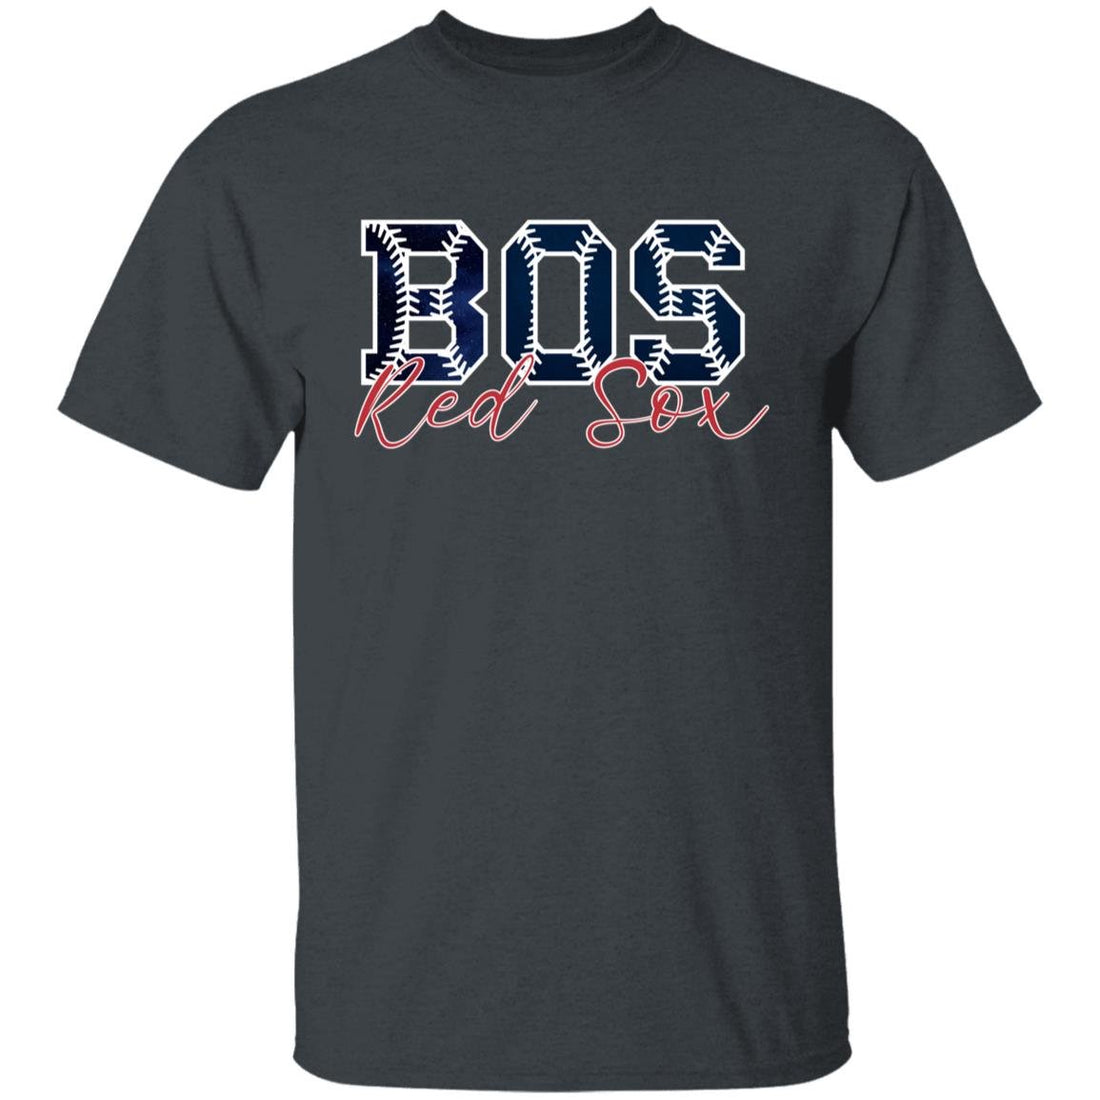 BOS Red Sox Youth T-Shirt - T-Shirts - Positively Sassy - BOS Red Sox Youth T-Shirt